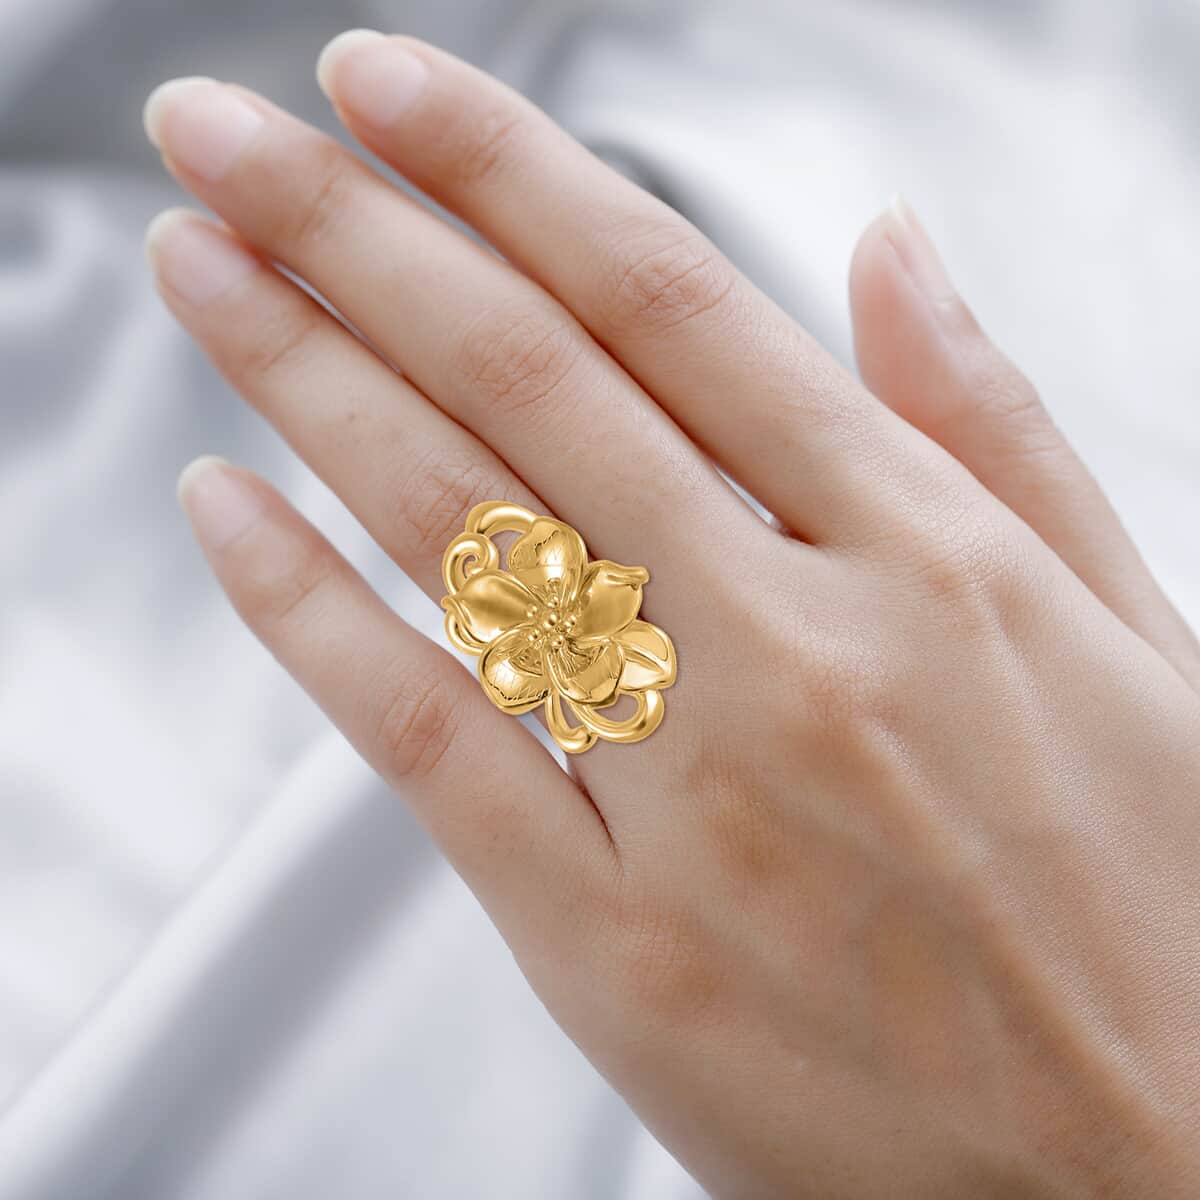 24K Yellow Gold Electroform Peony Floral Ring 2.75 Grams (Del. in 10-12 Days) image number 2